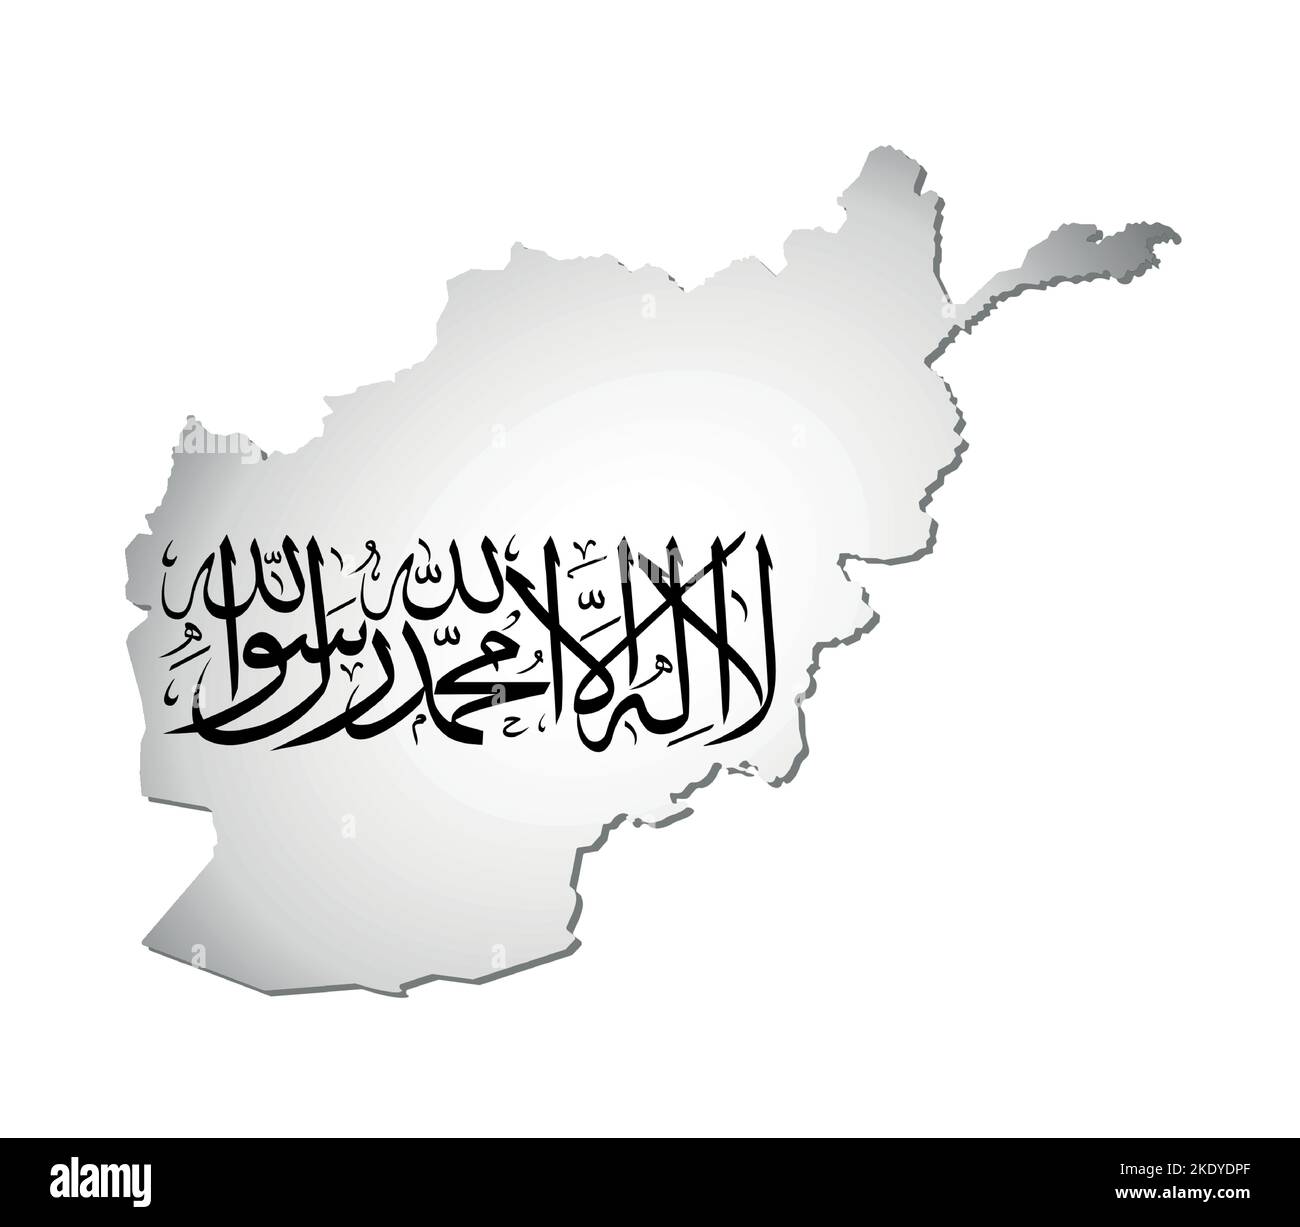 Vector isolated illustration. Official ensign on map of Afghanistan. National flag with black text Shahada on white background Stock Vector